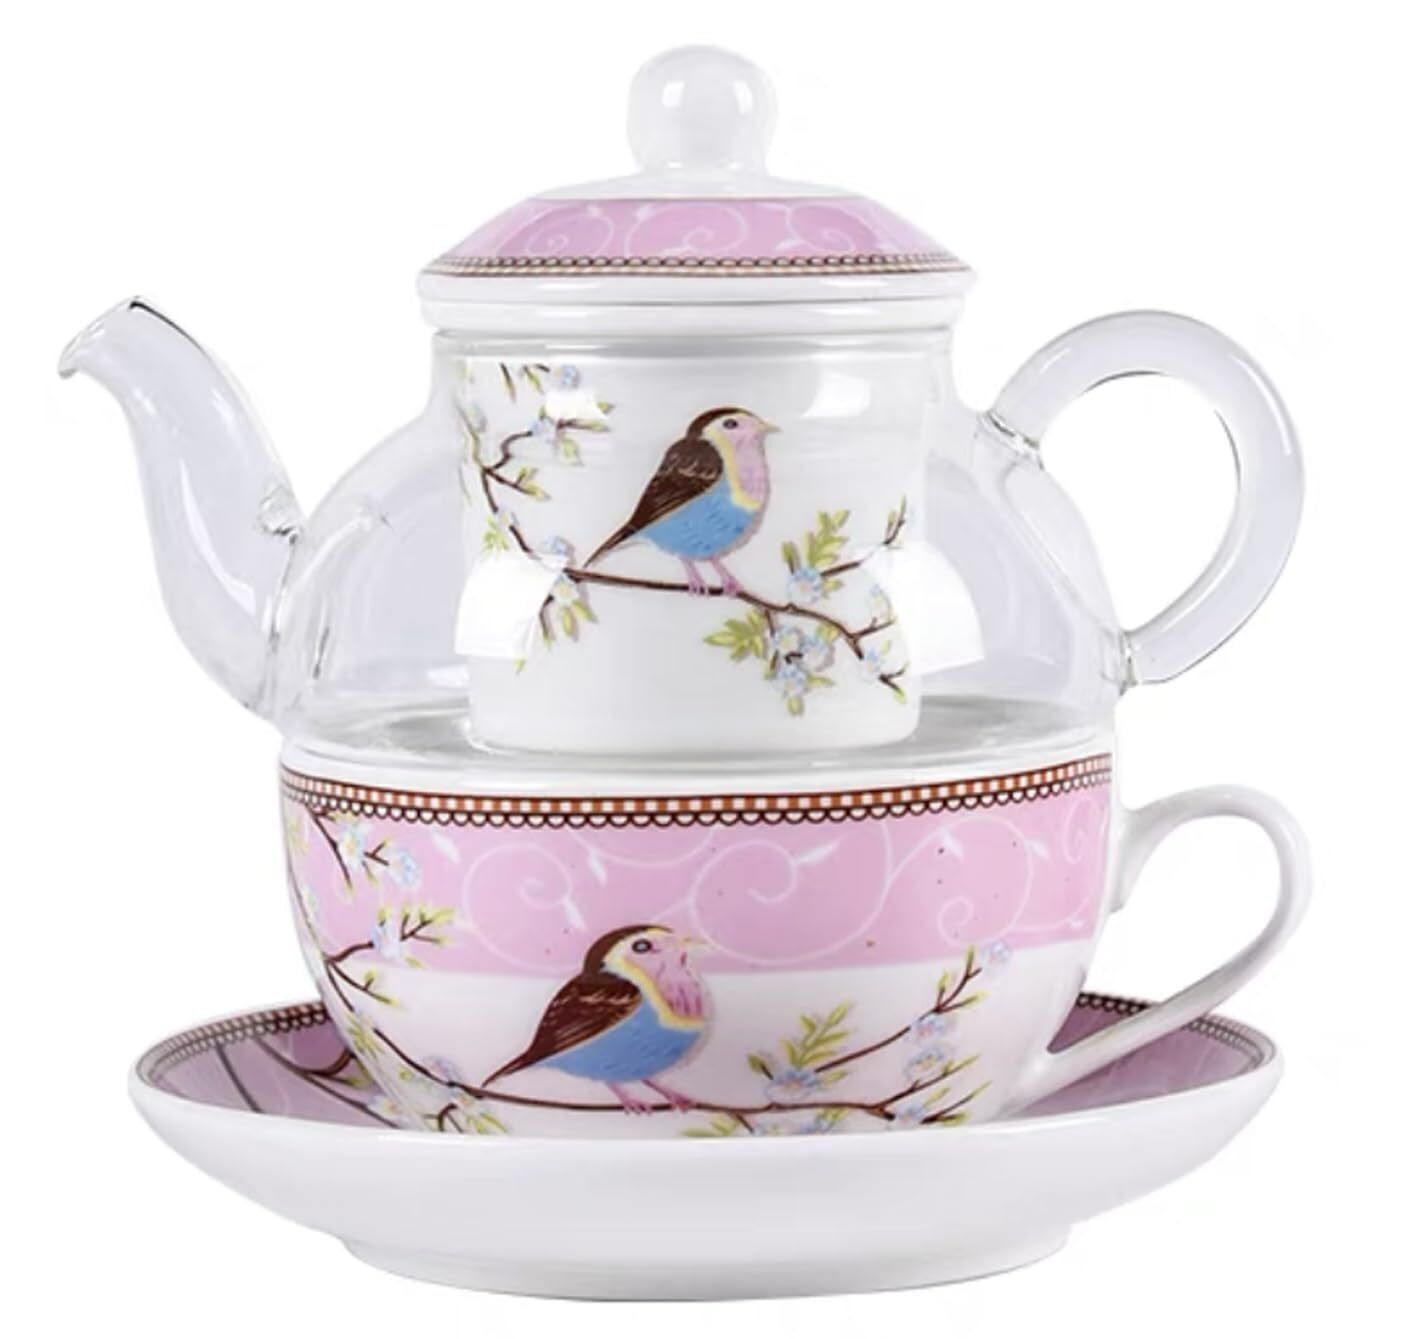 YBK Tech Tea for One Set Glass Teapot with Porcelain Infuser Strainer and Cup...